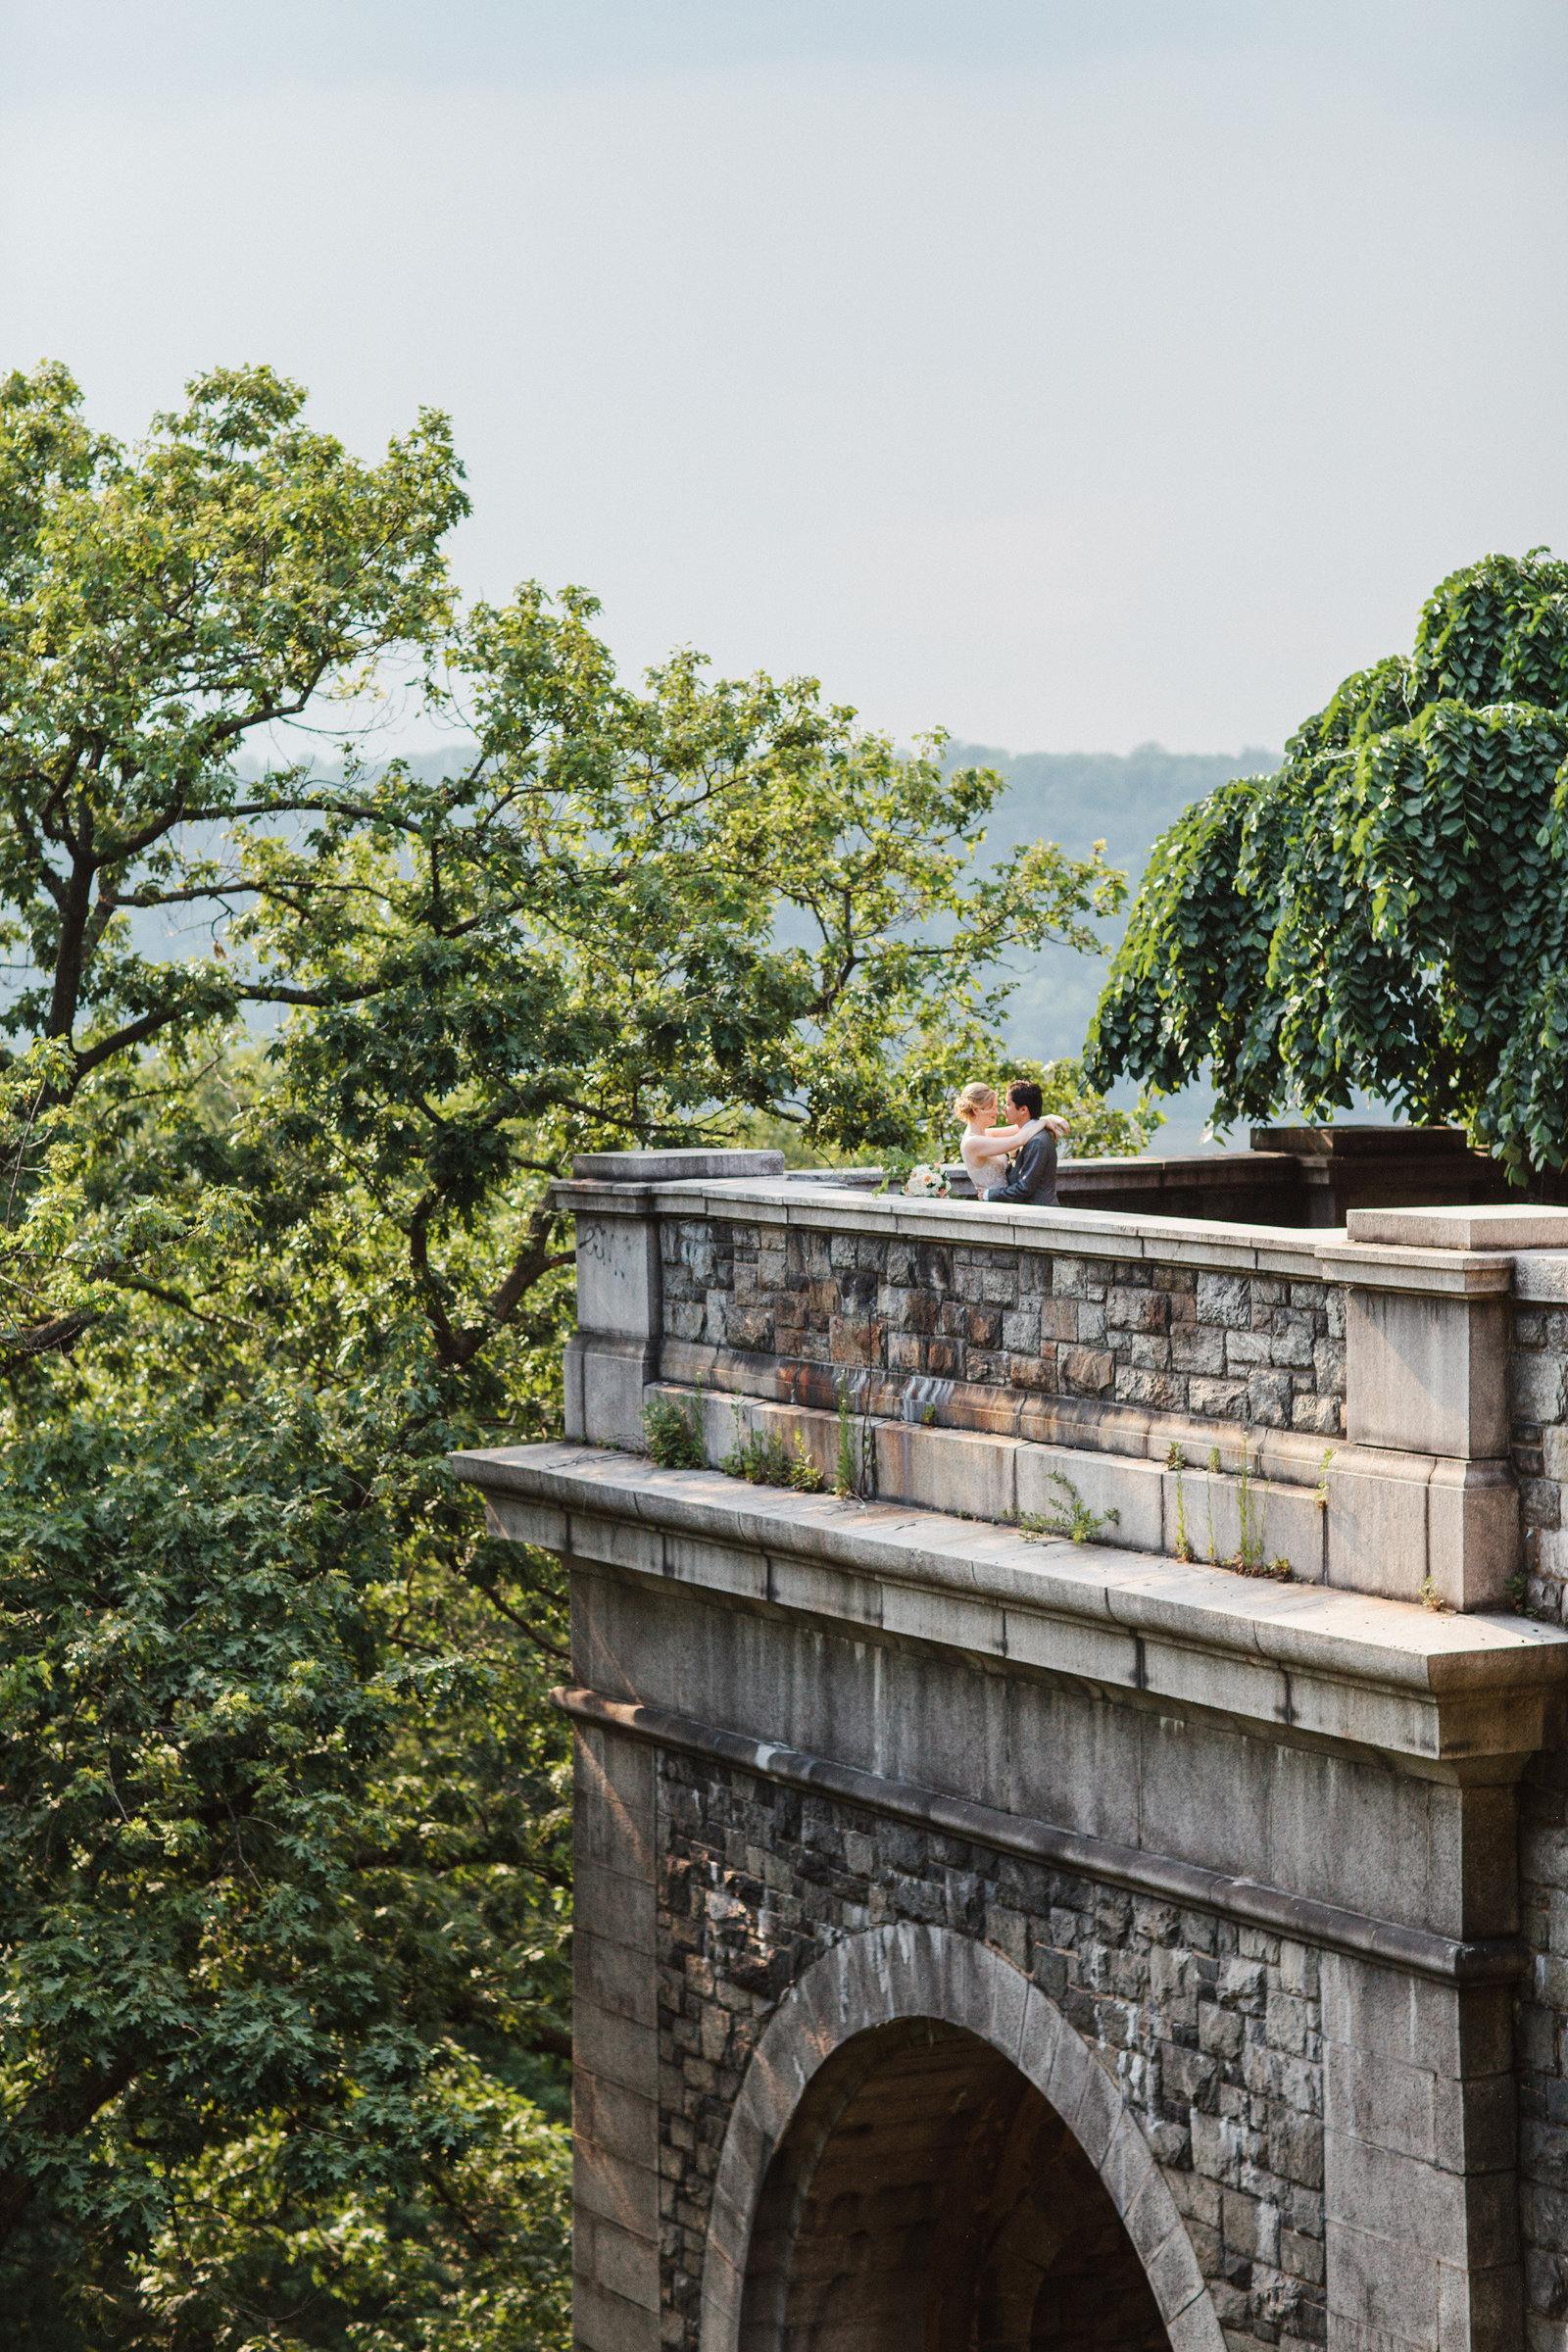 Bride and groom photographed on a historic man made building in Pennsylvania.